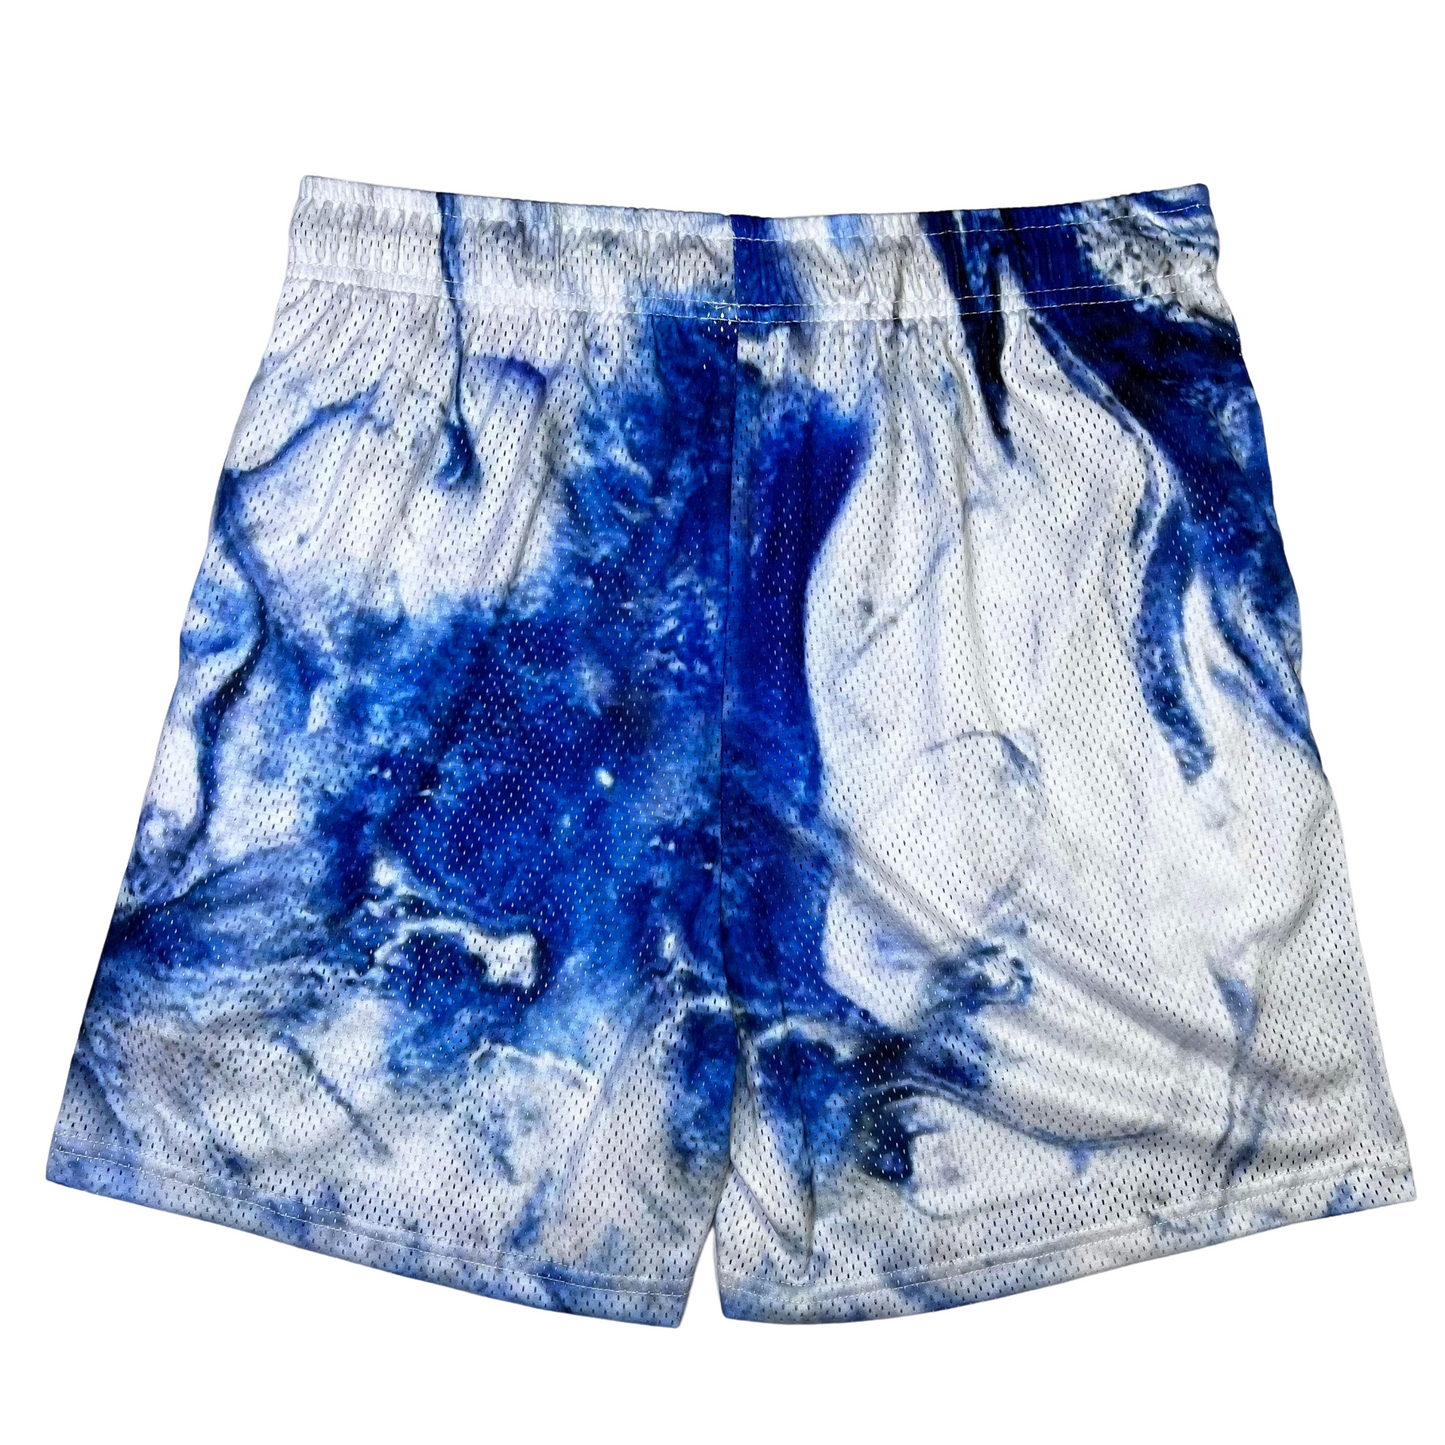 GZ Miami South Shore✥𝔾𝕣𝕠𝕦𝕟𝕕ℤ𝕖𝕣𝕠®✥2023 Southern suit big guy/GZ American casual neutral sports outdoor glass blue and white quarter shorts and ball pants 